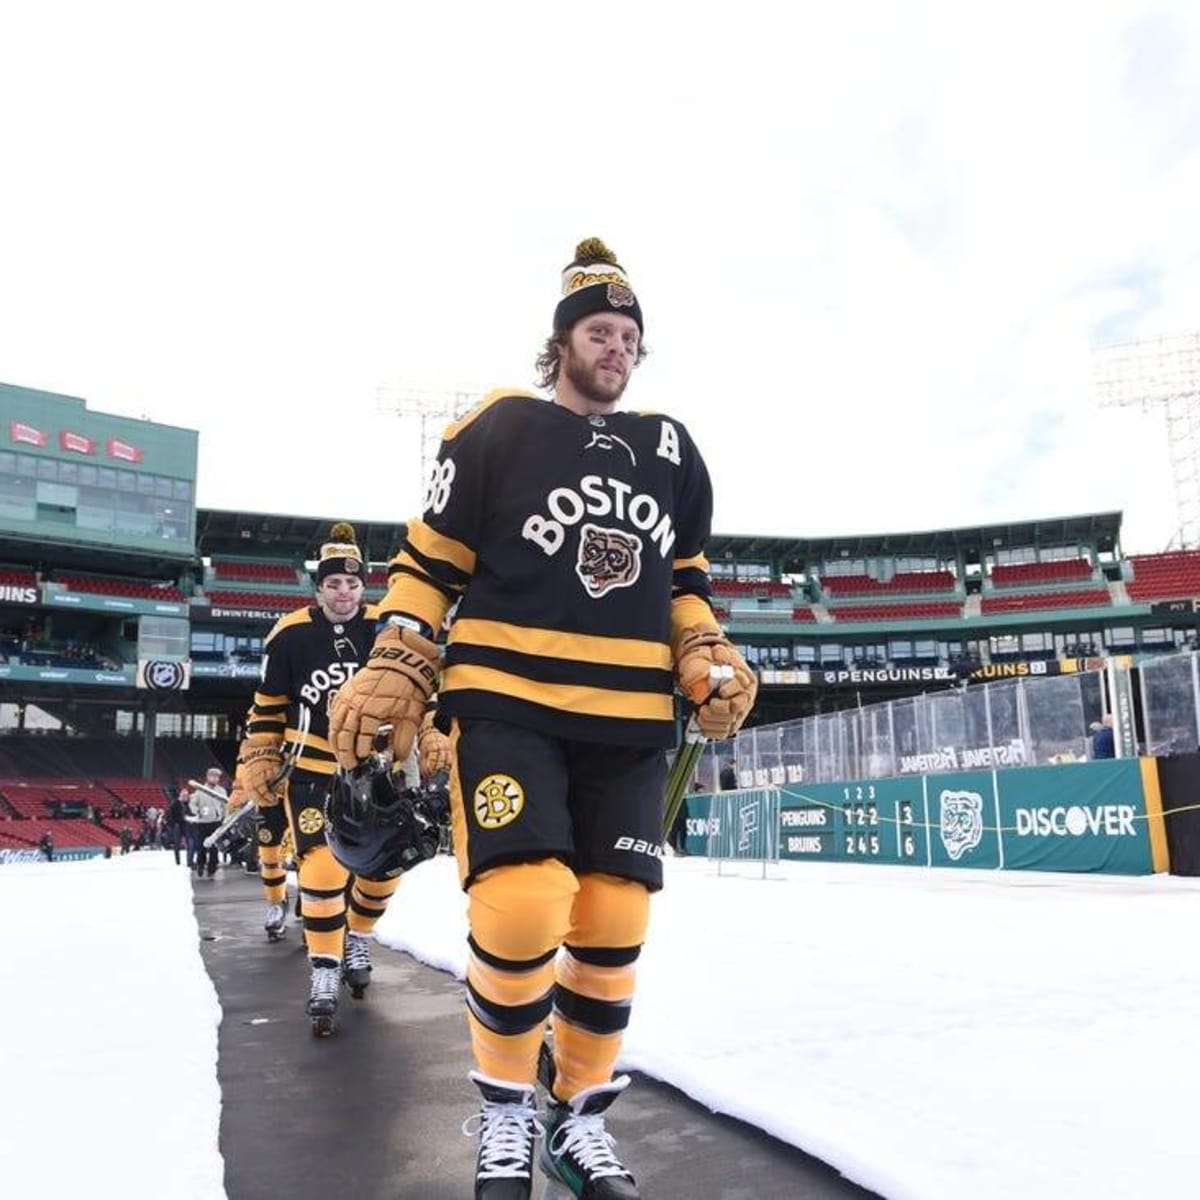 Winter Classic tickets: Rink orientation for Bruins-Penguins to be